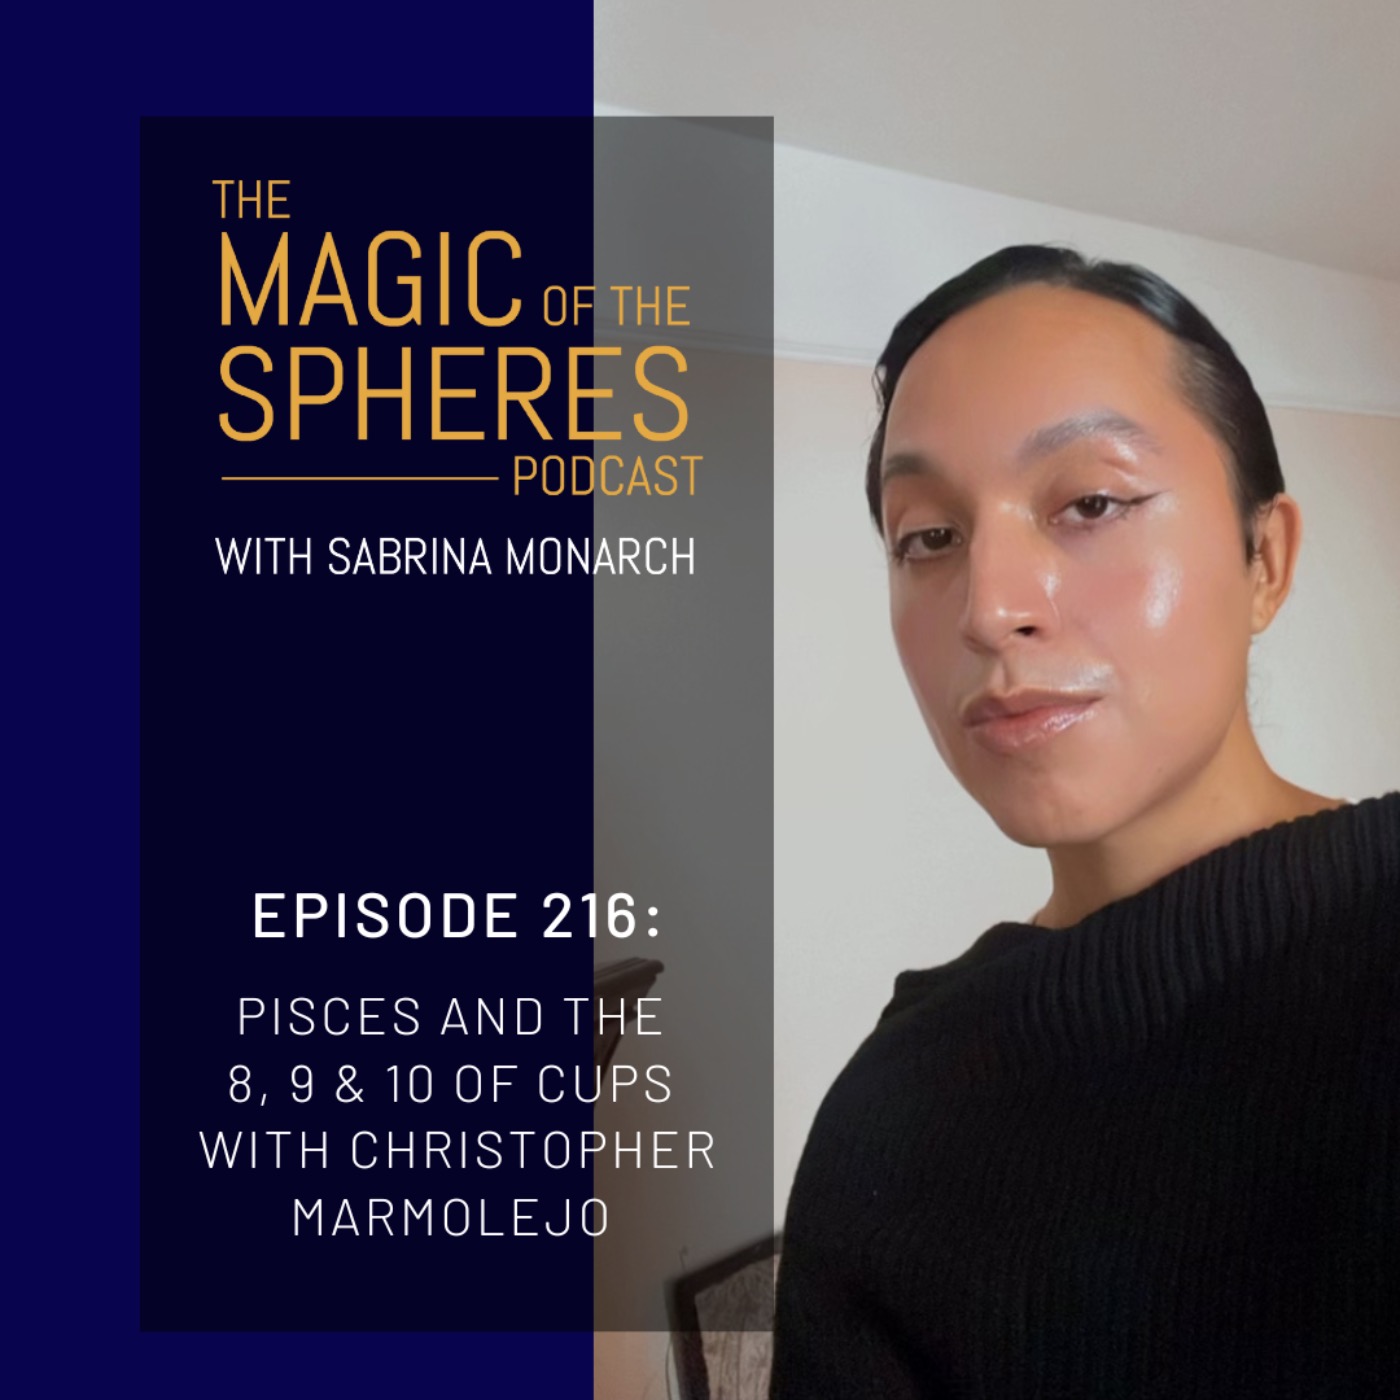 Pisces and the 8, 9, & 10 of Cups with Christopher Marmolejo